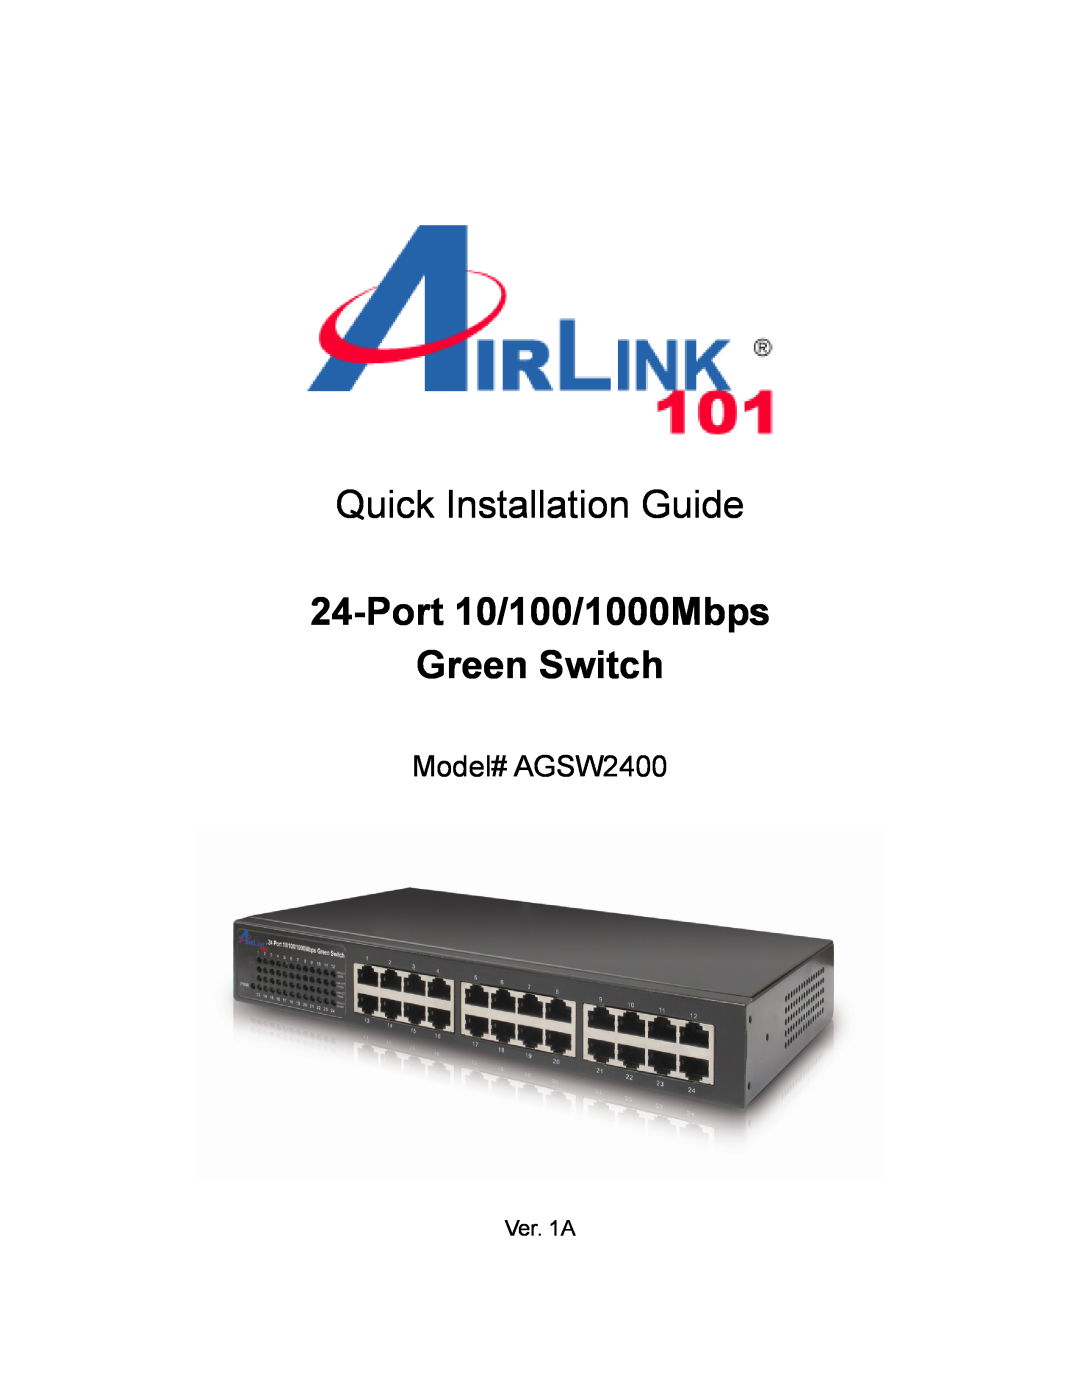 Airlink101 AGSW2400 manual Quick Installation Guide, Port 10/100/1000Mbps Green Switch 